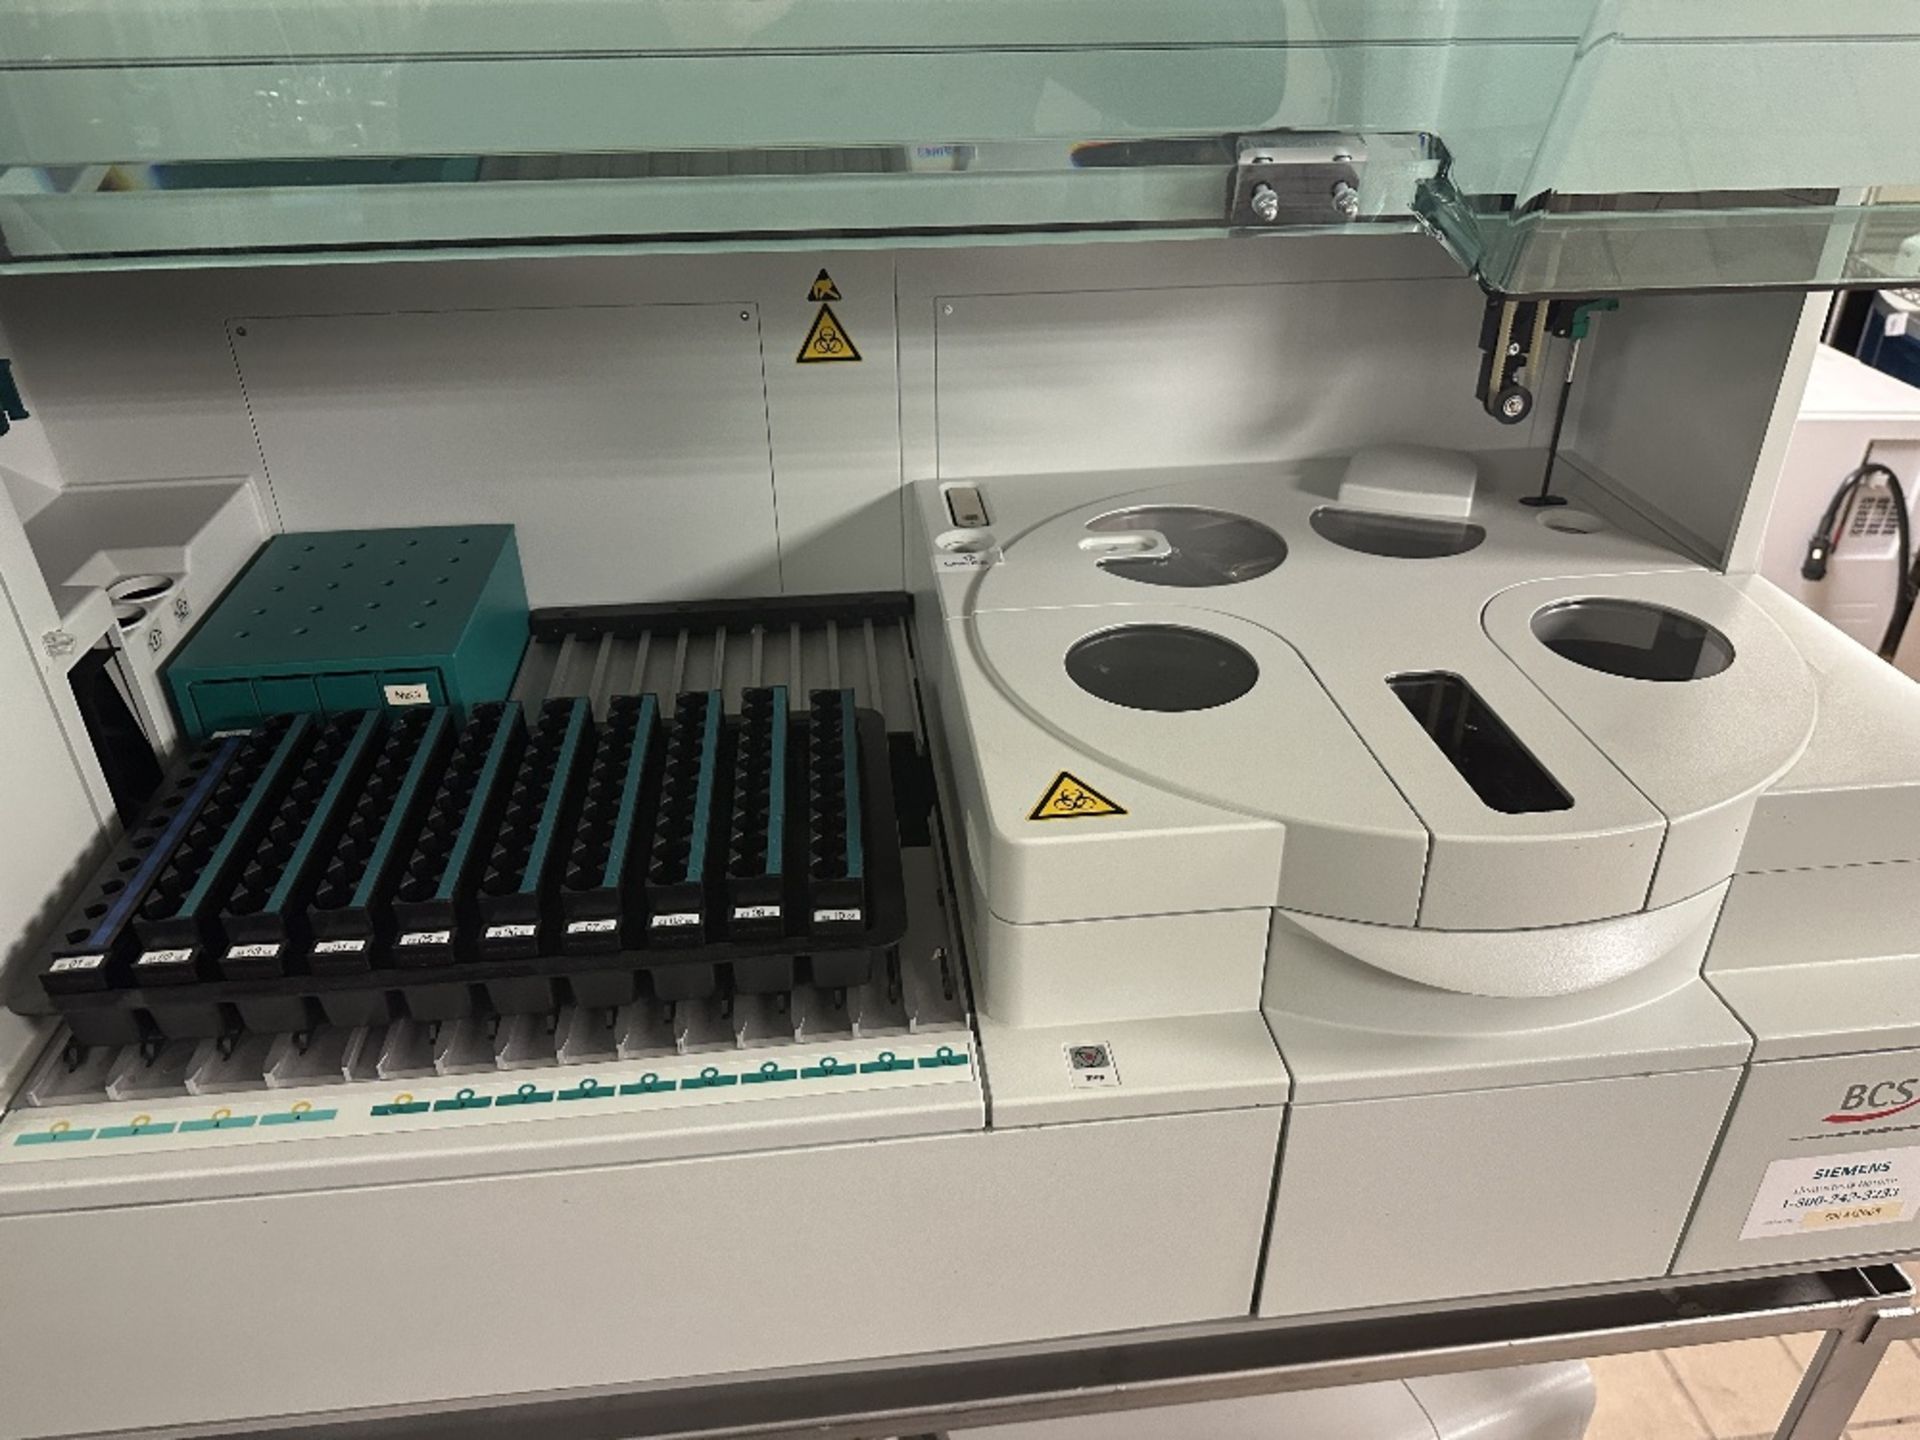 Siemens BCS® XP System Automated Hemostasis Analyzer (LOCATED IN MIDDLETOWN, N.Y.)-FOR PACKAGING & - Image 2 of 4